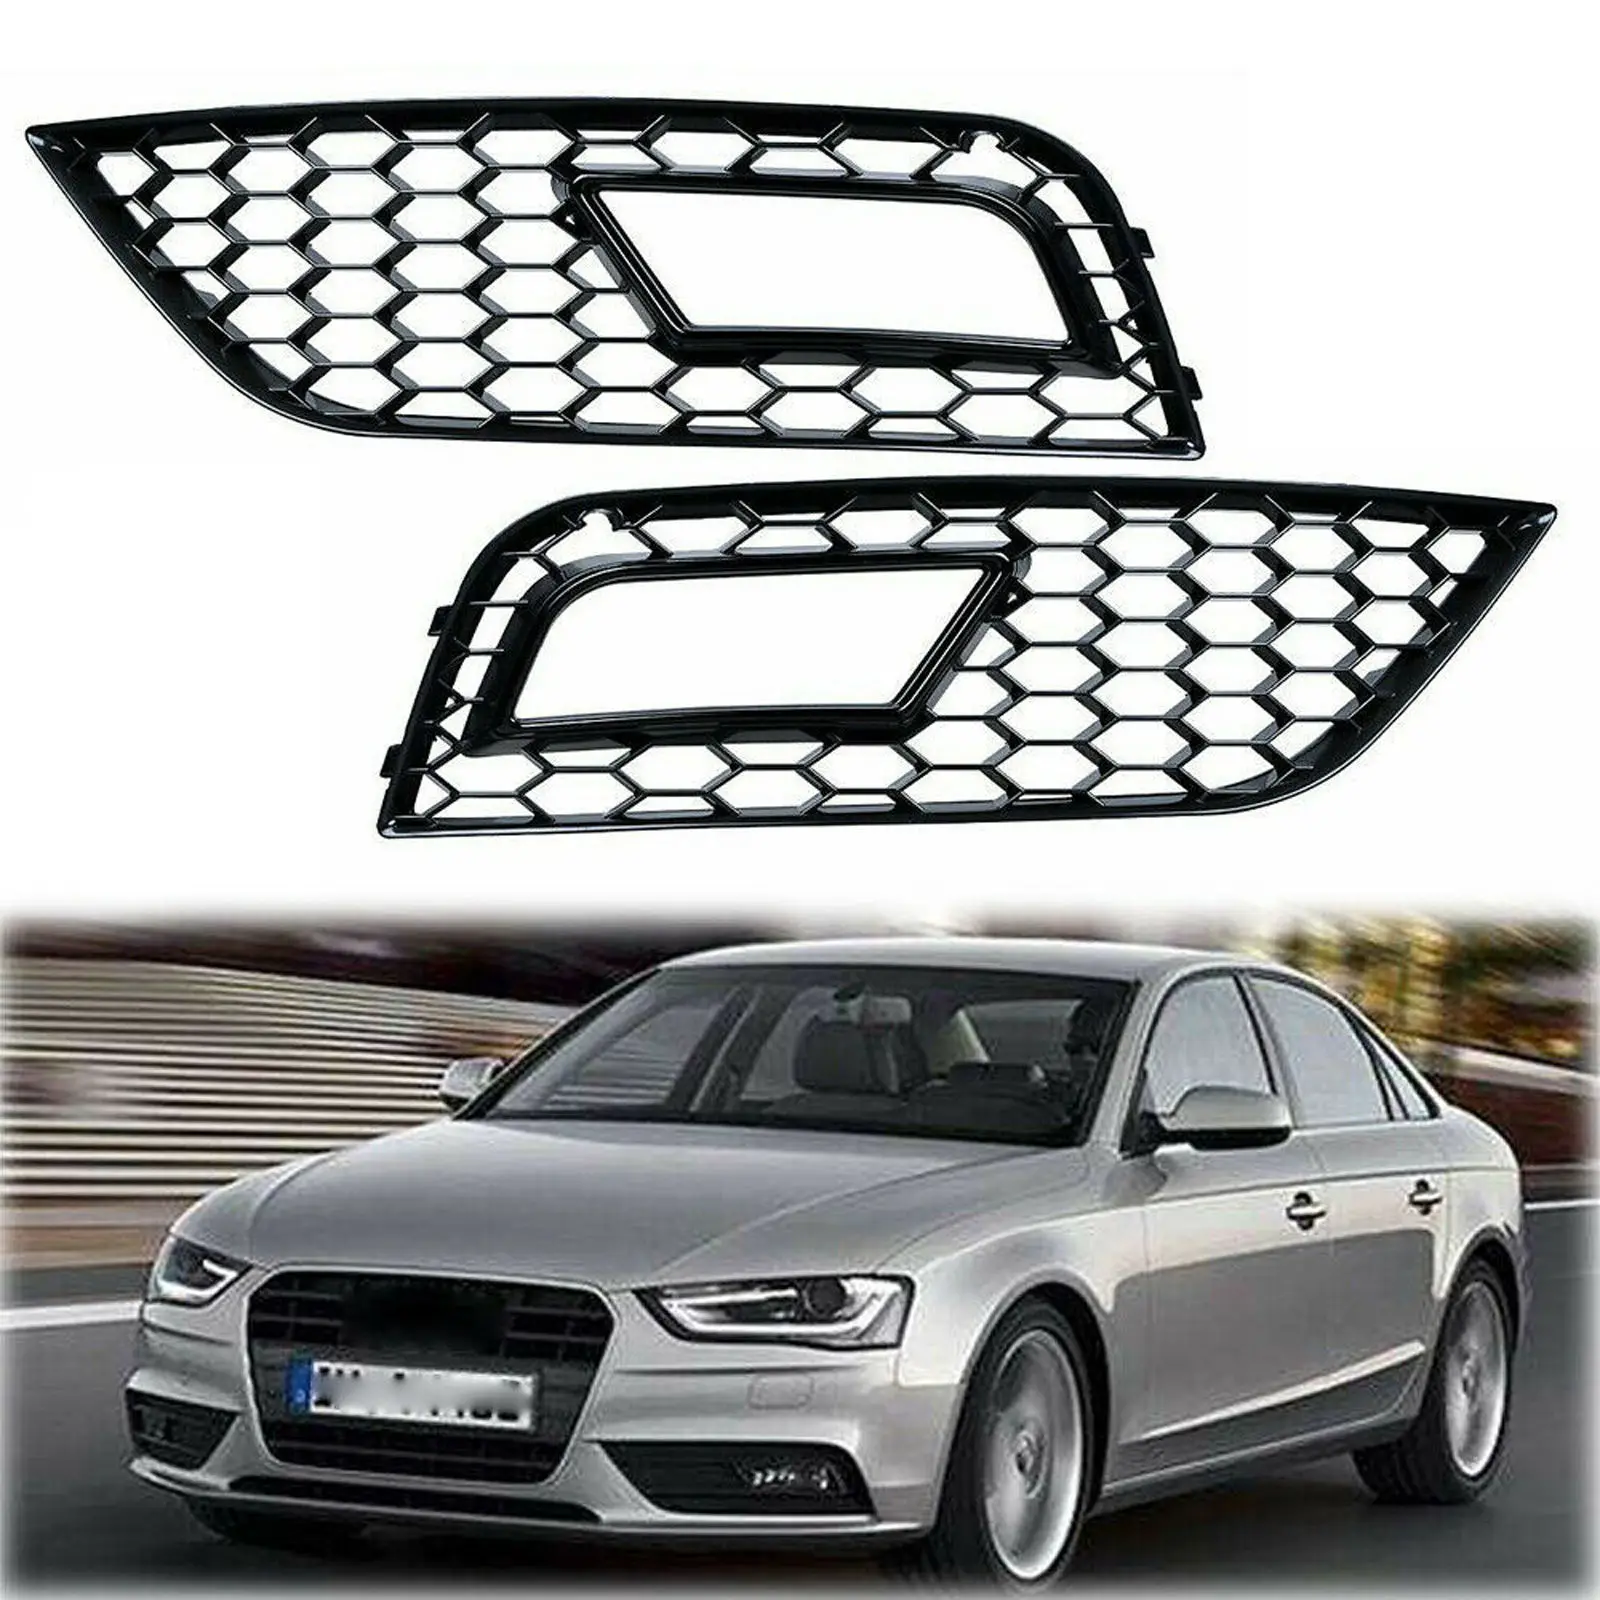 2x RS4 Style Front Fog Light Grilles for Audi A4 B8.5 2013-2016